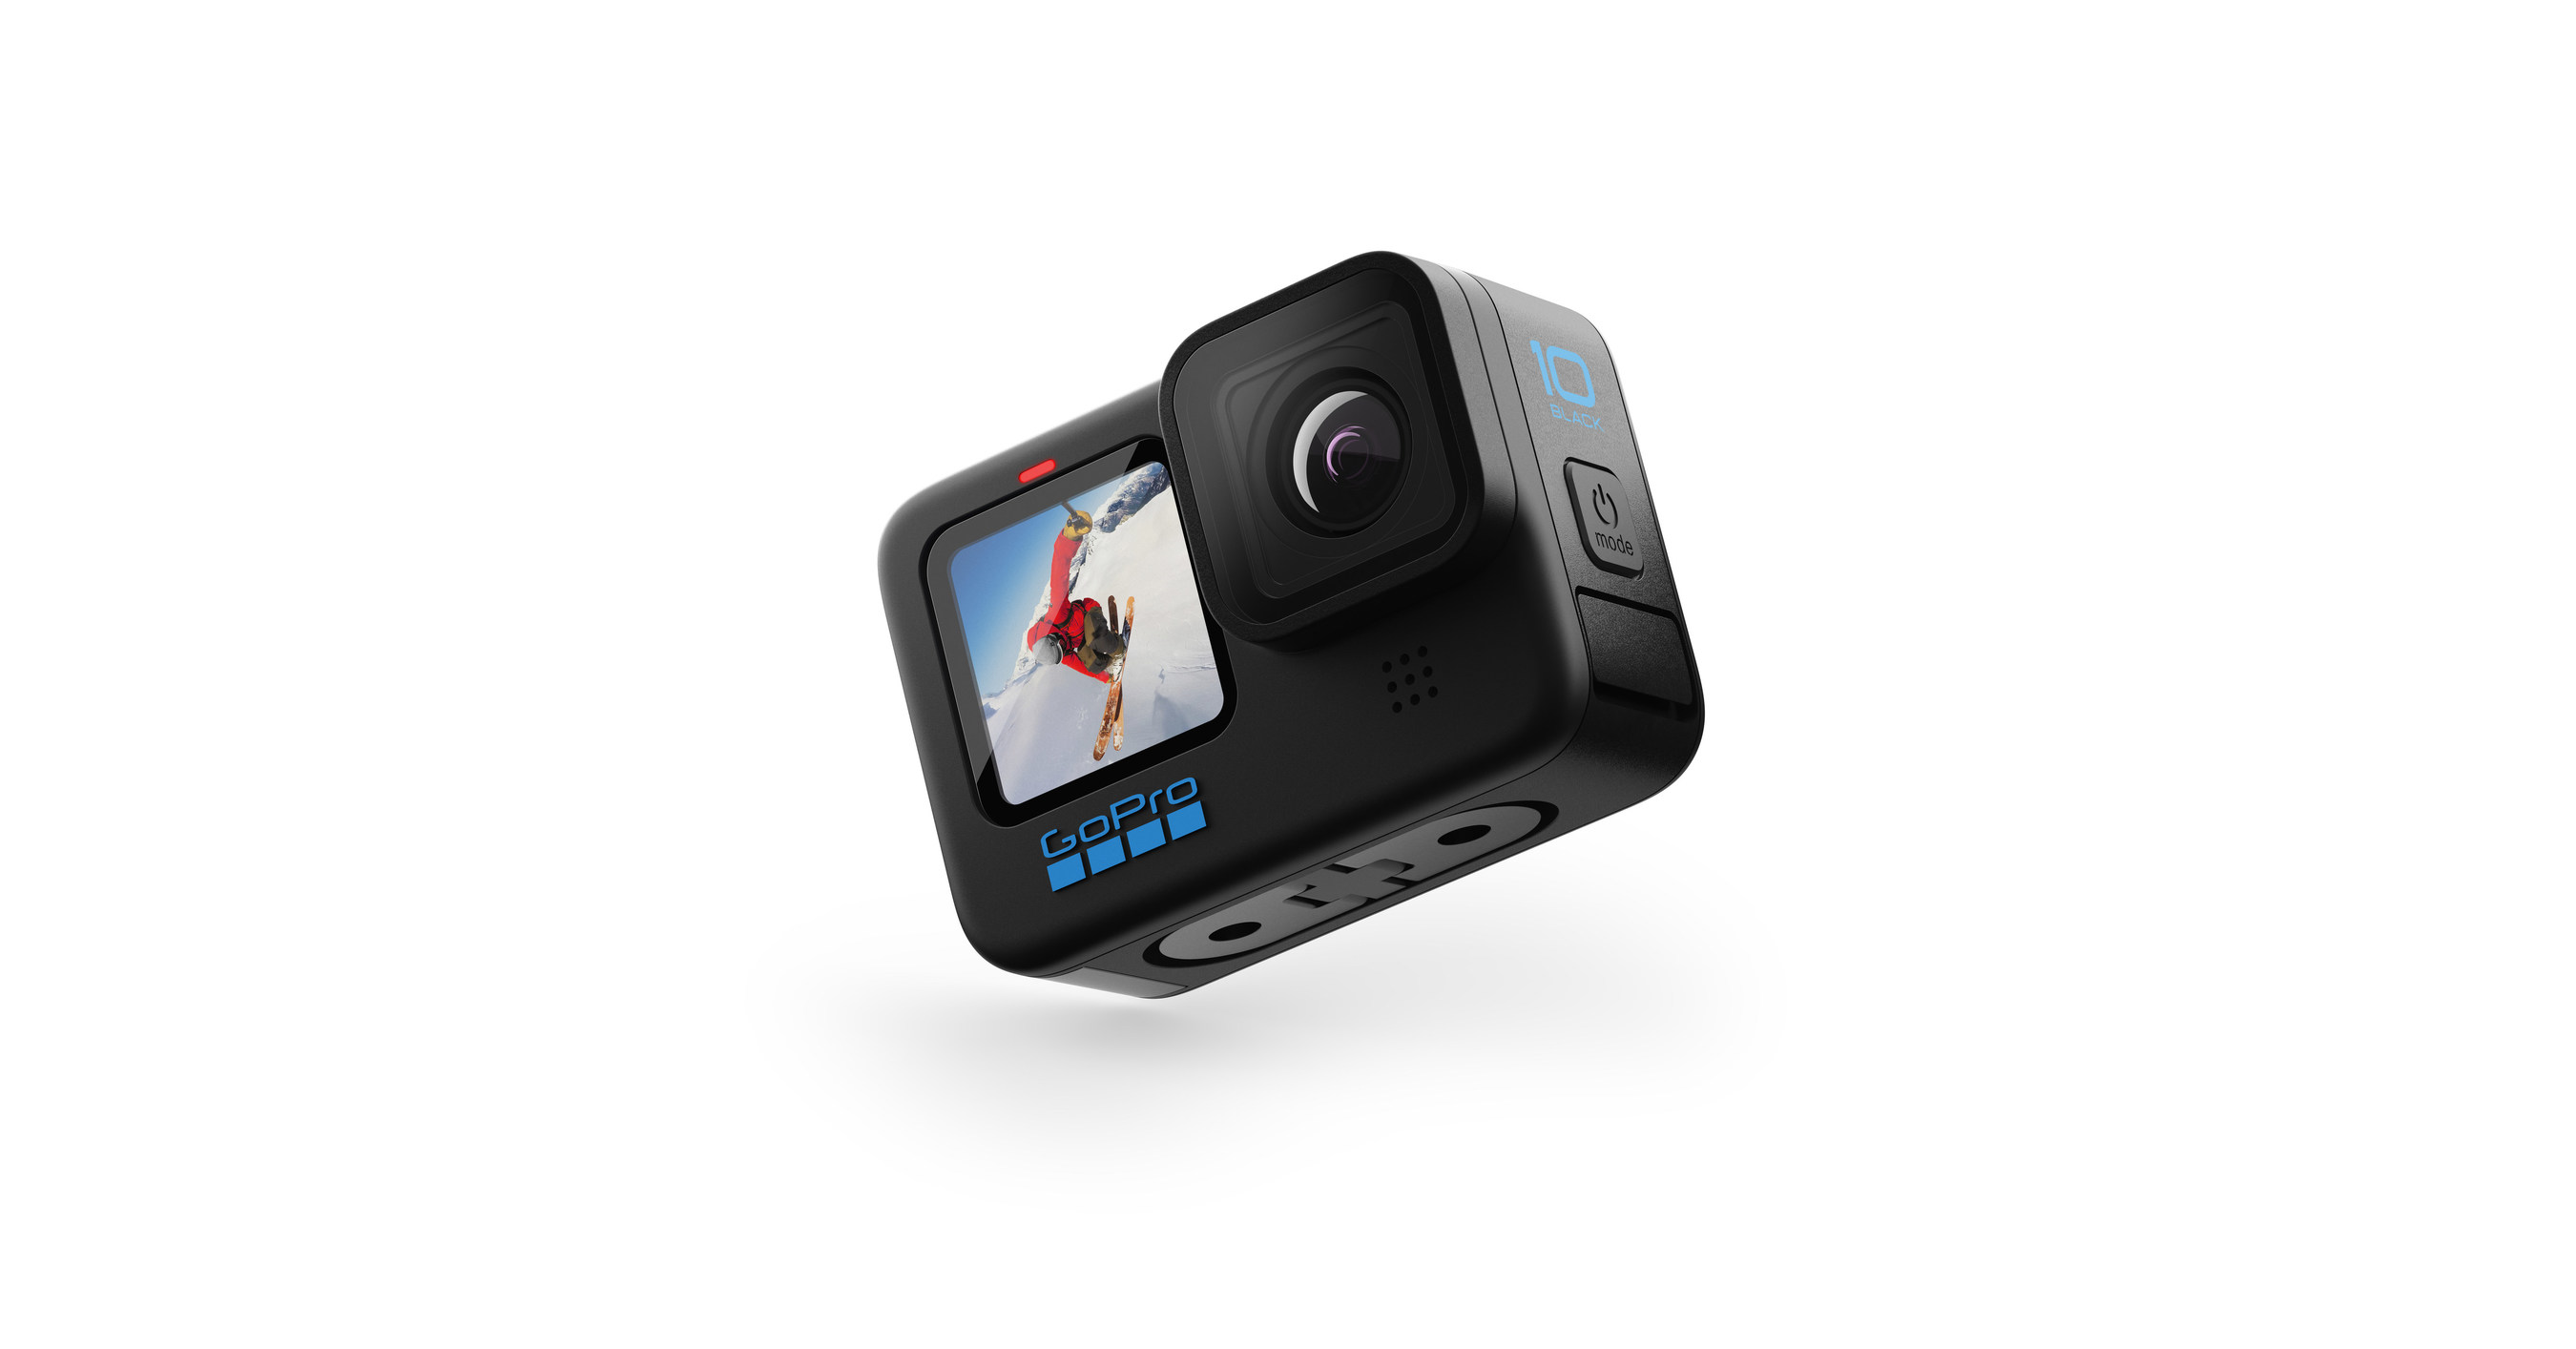 Gopro S New Hero10 Black Camera Delivers Breakthrough Image Quality And 2x Speed With Ease